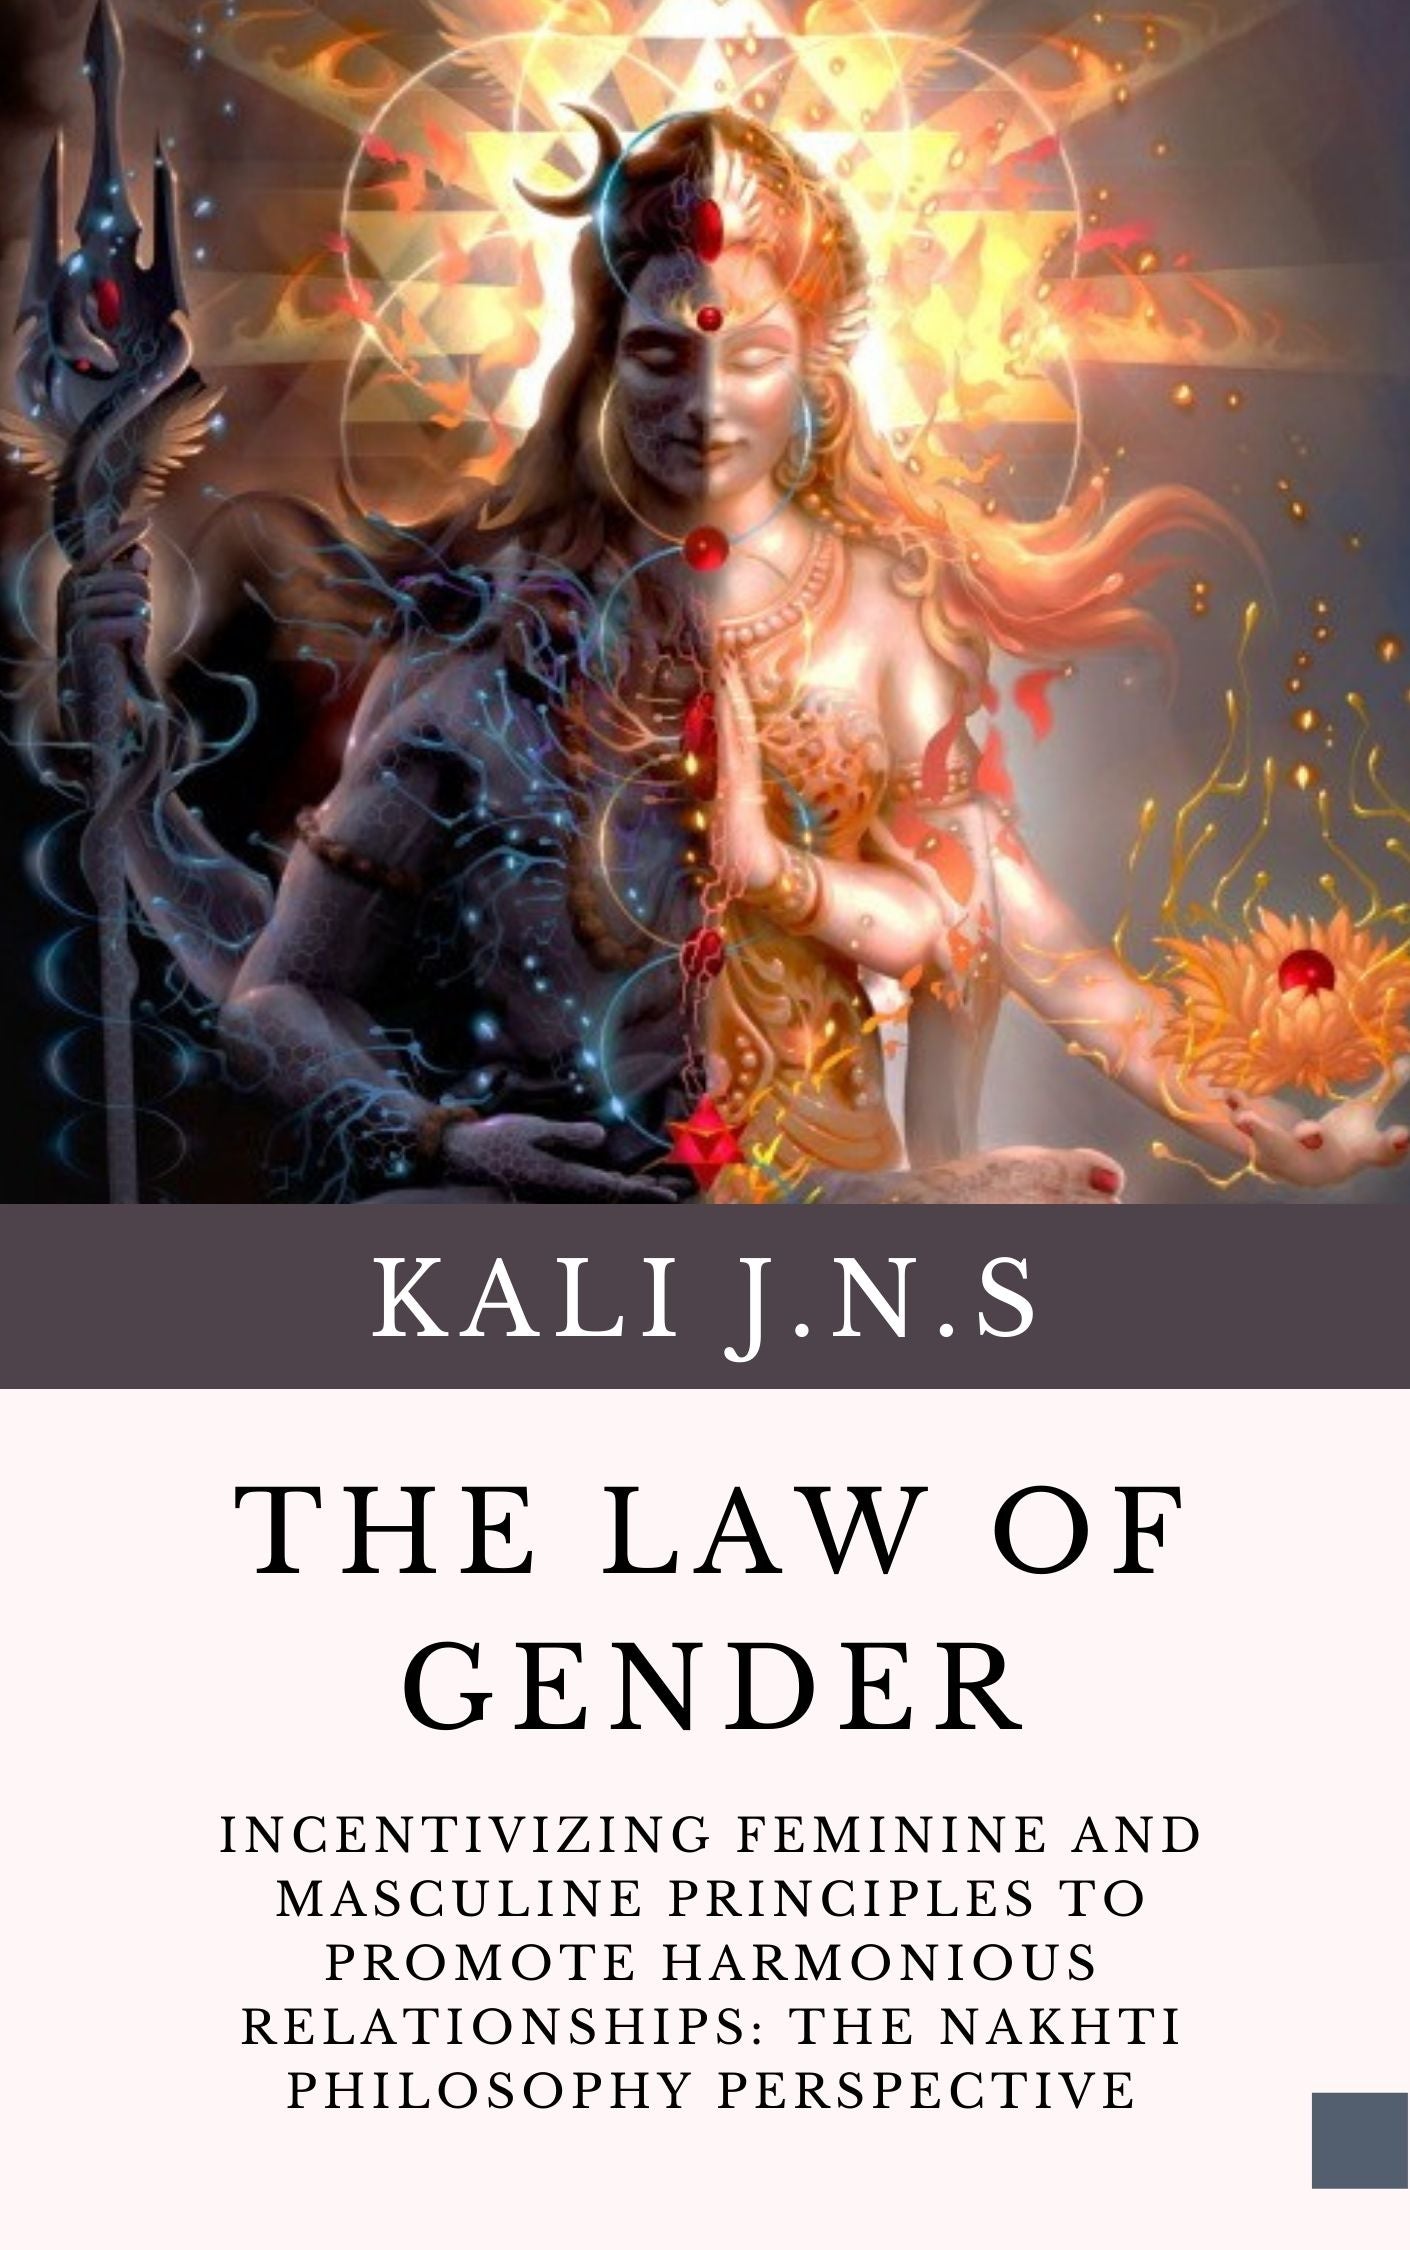 The Law of Gender: Incentivizing Feminine and Masculine Principles to promote Harmonious Relationships: The Nakhti Philosophy Perspective